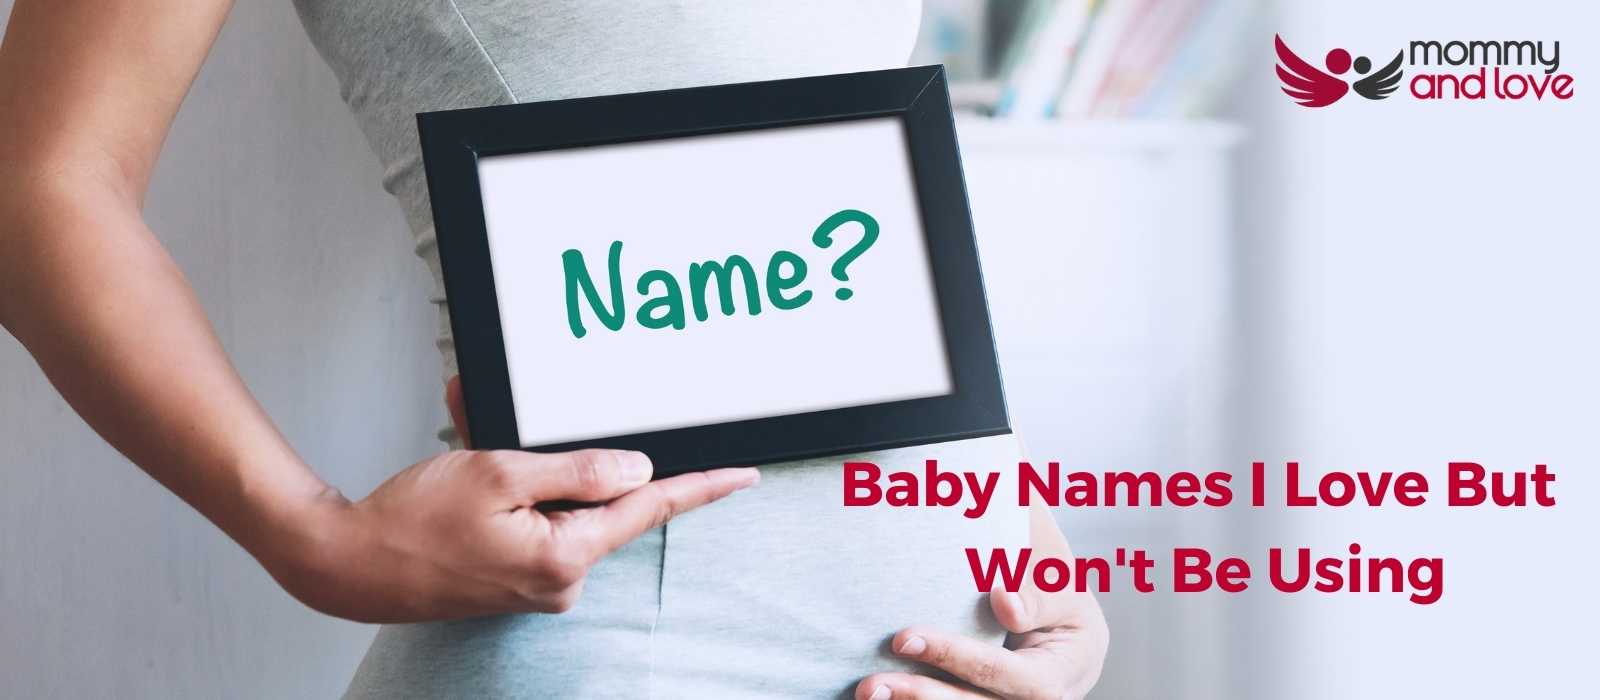 Baby Names I Love But Won't Be Using